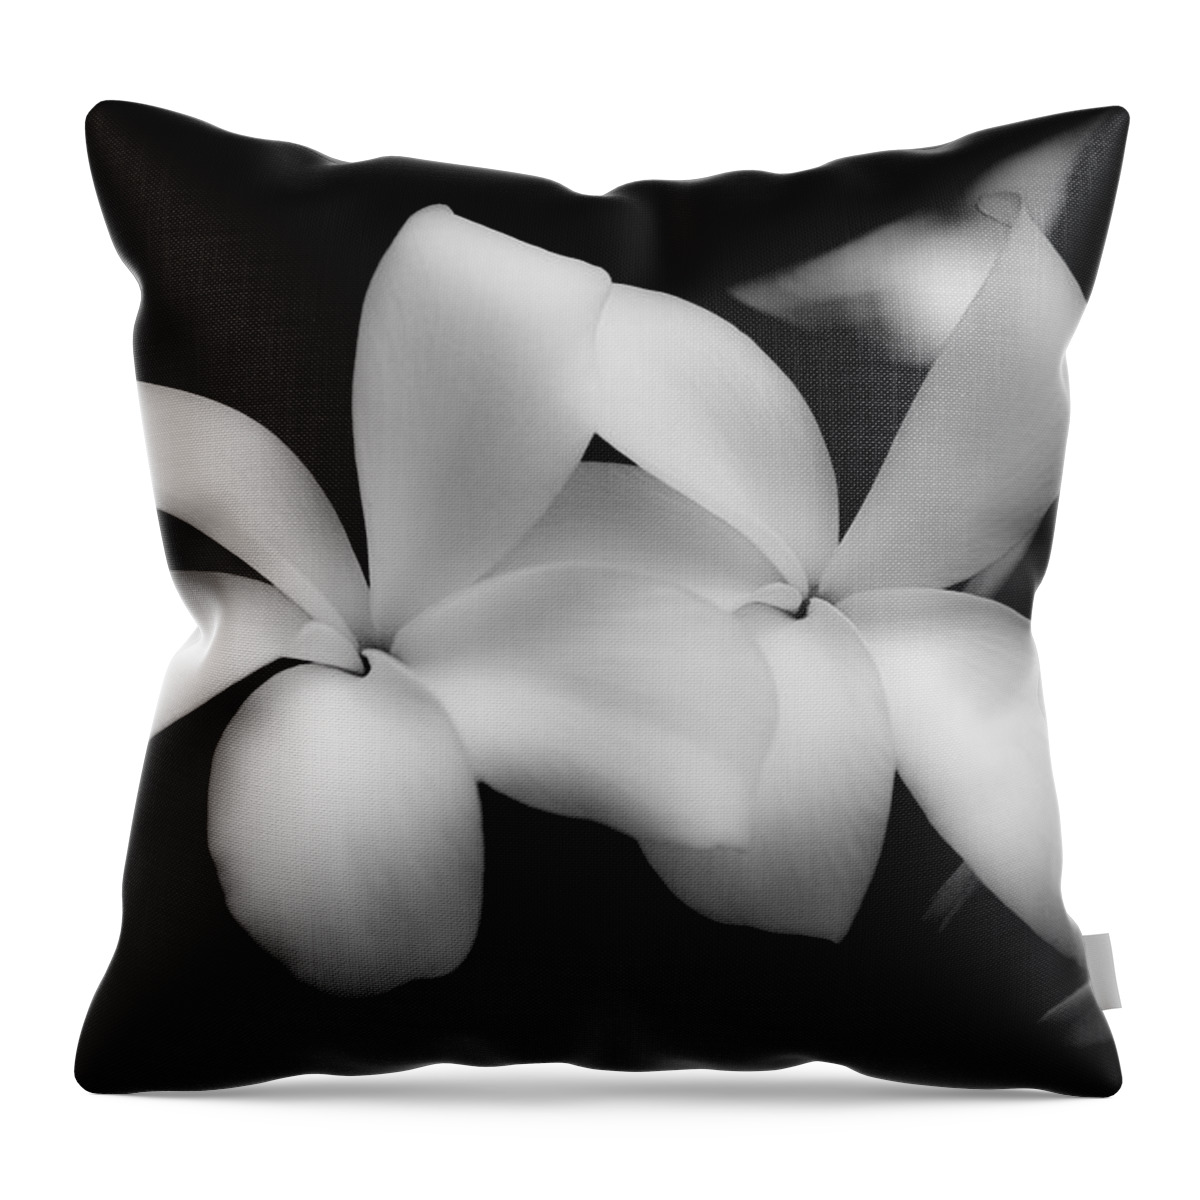 Floral Throw Pillow featuring the photograph Soft Floral Beauty by Ron White